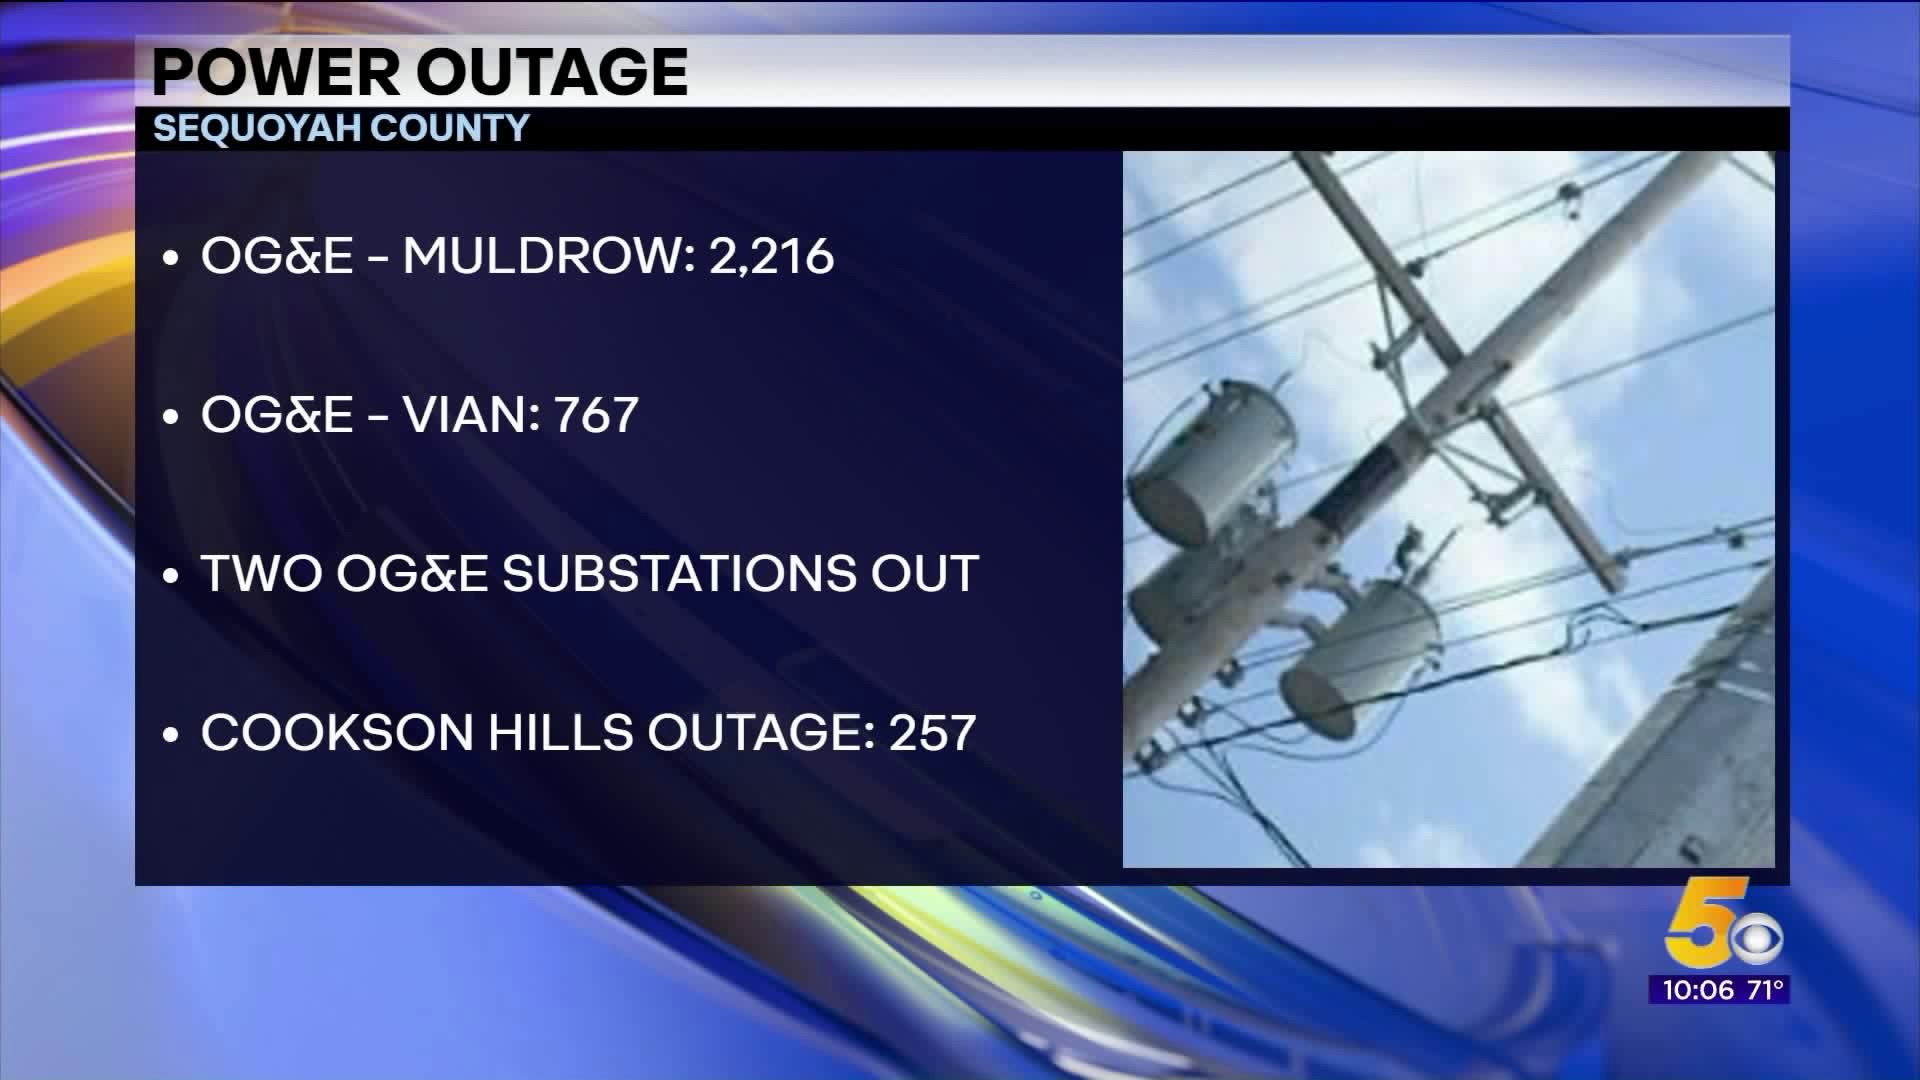 Power Outage in Sequoyah County